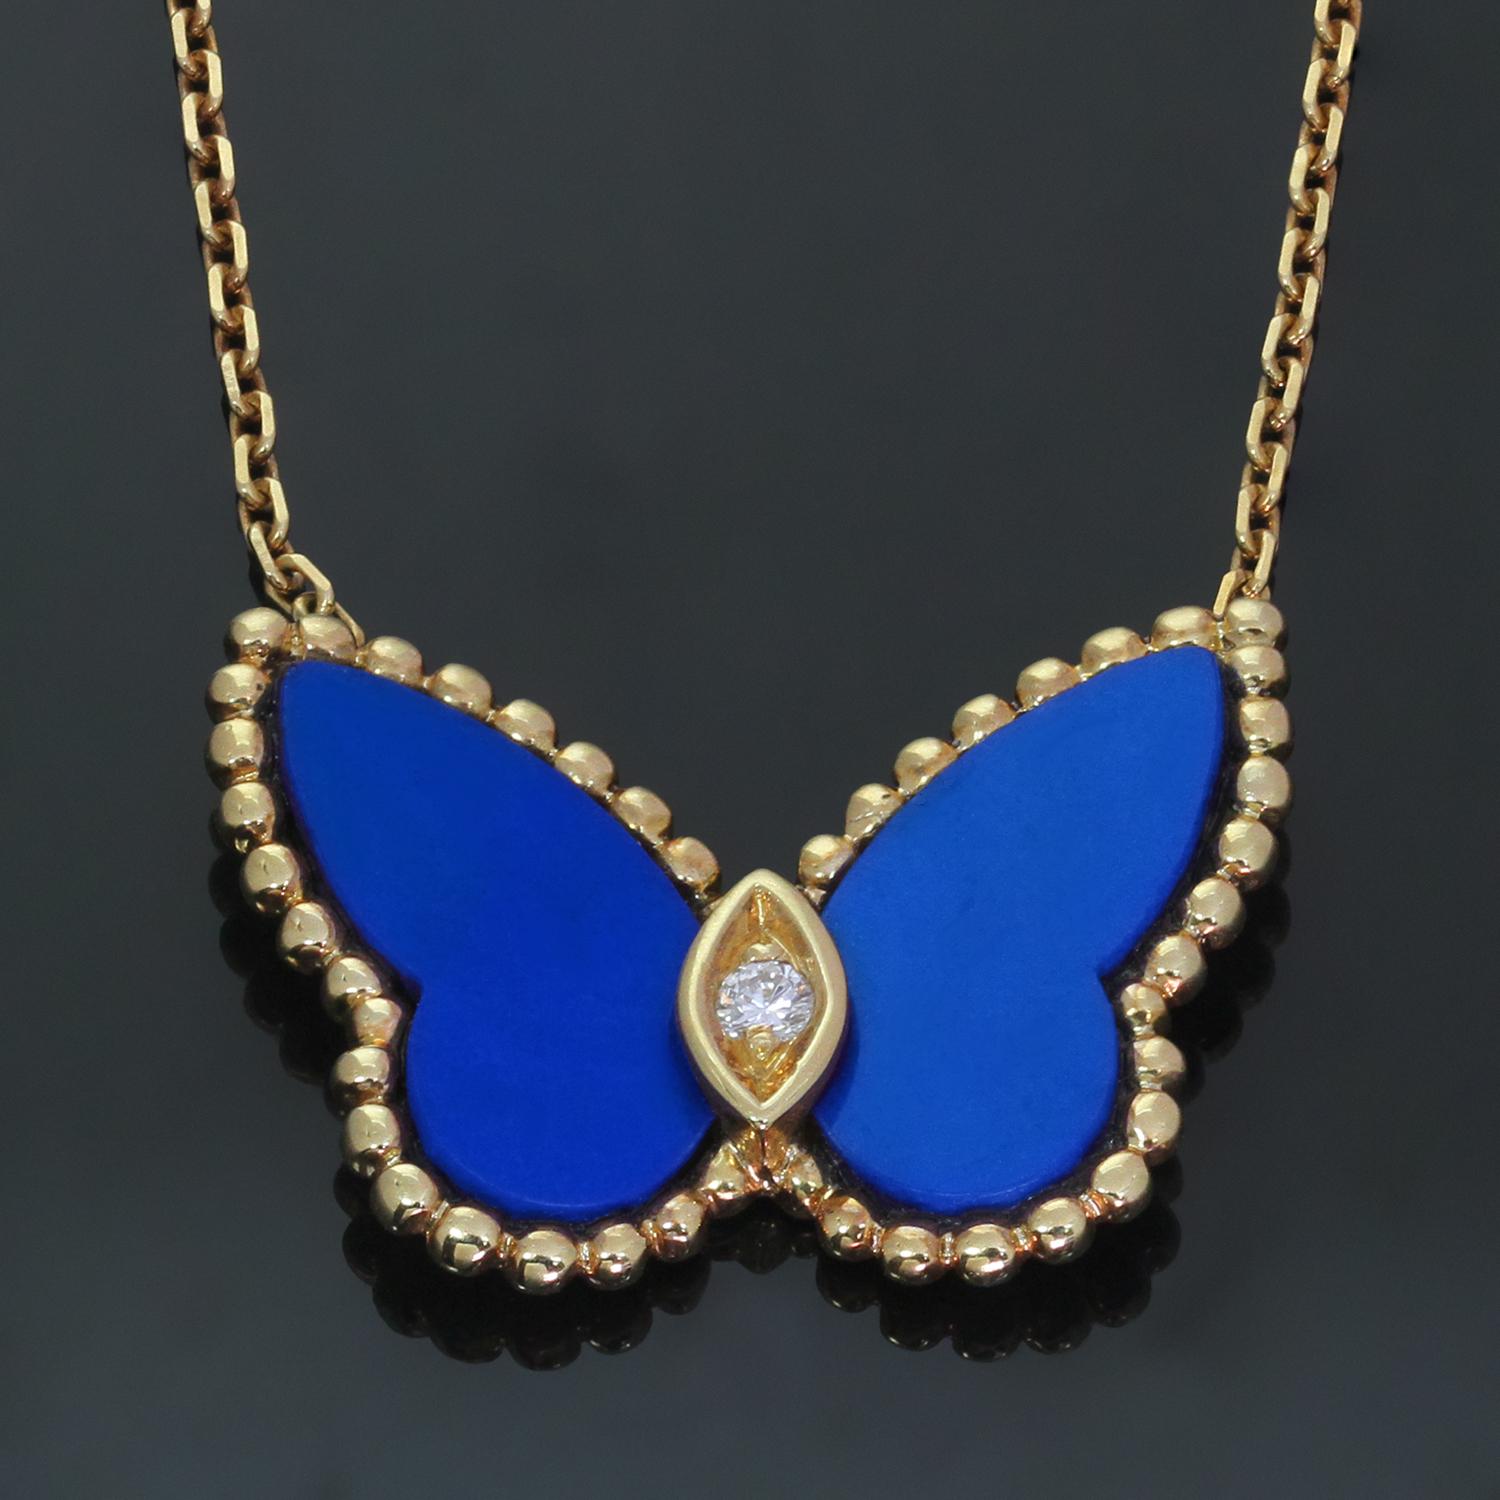 This fabulous vintage Van Cleef & Arpels necklace from the timeless Flying Beauties collection is crafted in 18k yellow gold and features a butterfly pendant with lapis lazuli wings accented solitaire brilliant-cut diamond and completed with an